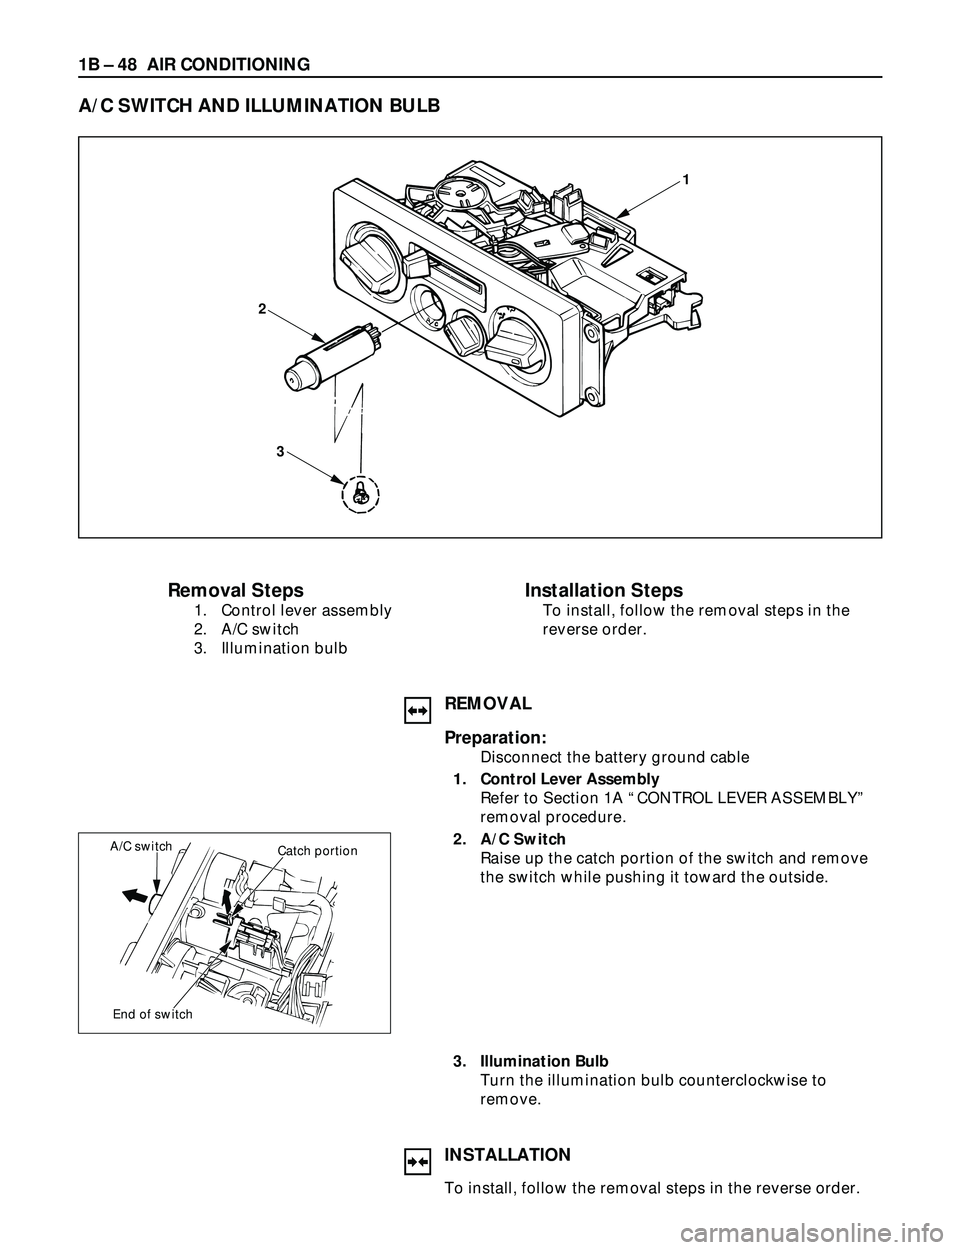 ISUZU TROOPER 1998  Service Repair Manual 1B Ð 48 AIR CONDITIONING
1
2
3
Removal Steps
1. Control lever assembly
2. A/C switch
3. Illumination bulb
Installation Steps
To install, follow the removal steps in the
reverse order.
A/C SWITCH AND 